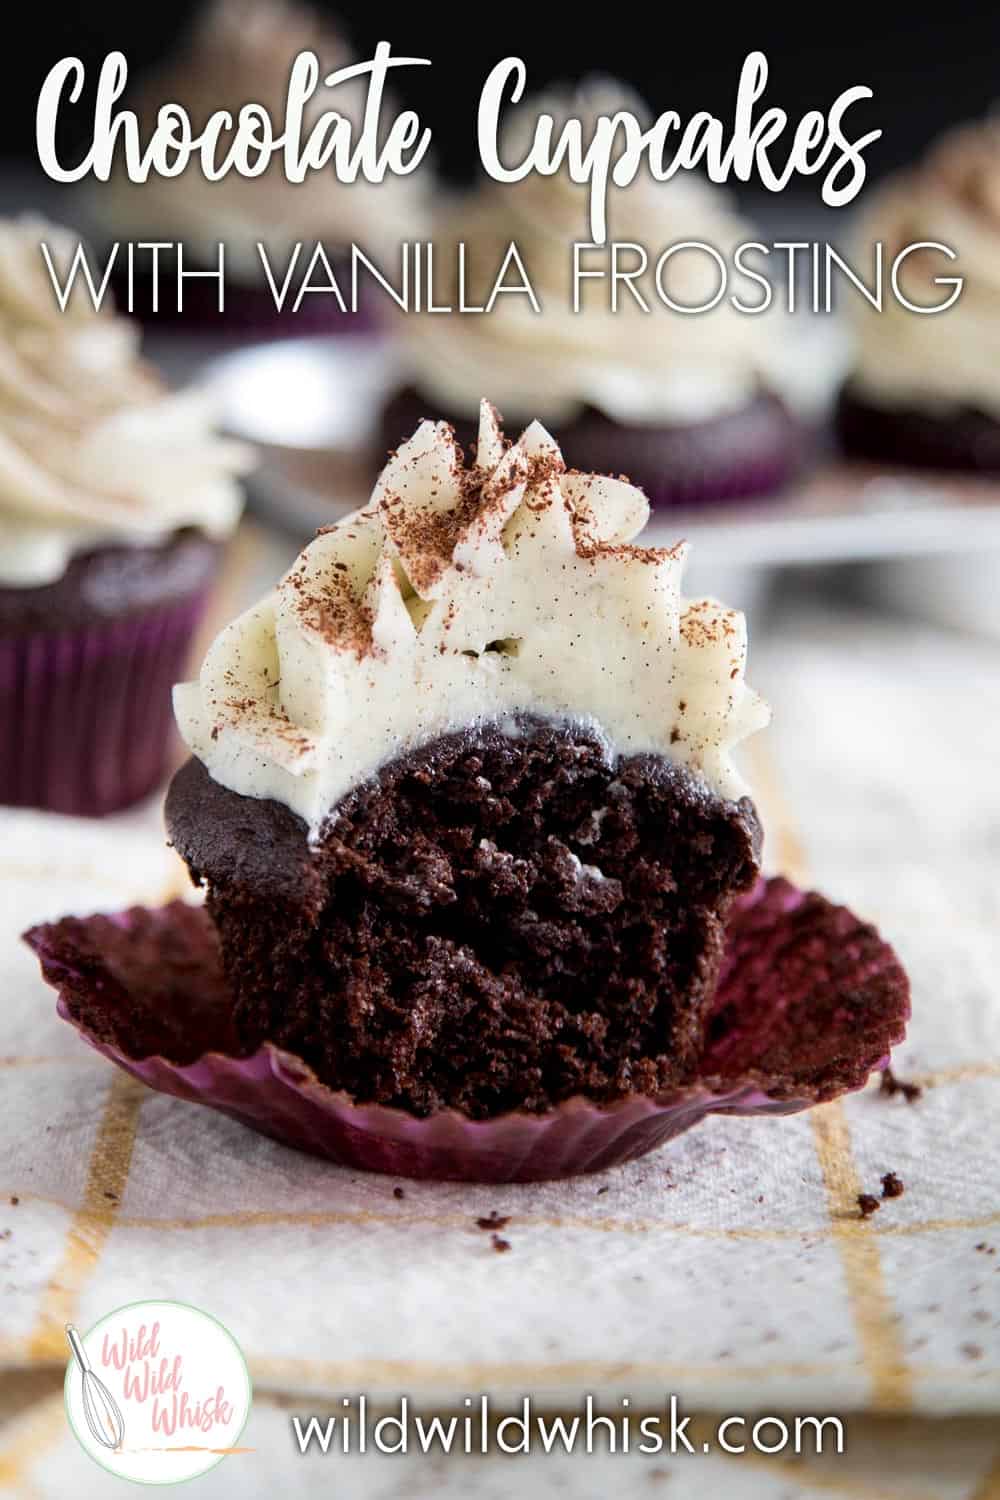 A simple recipe for Chocolate Cupcakes, made from scratch, that will be a great base for fillings and fancy frosting. #wildwildwhisk #chocolatecupcakes